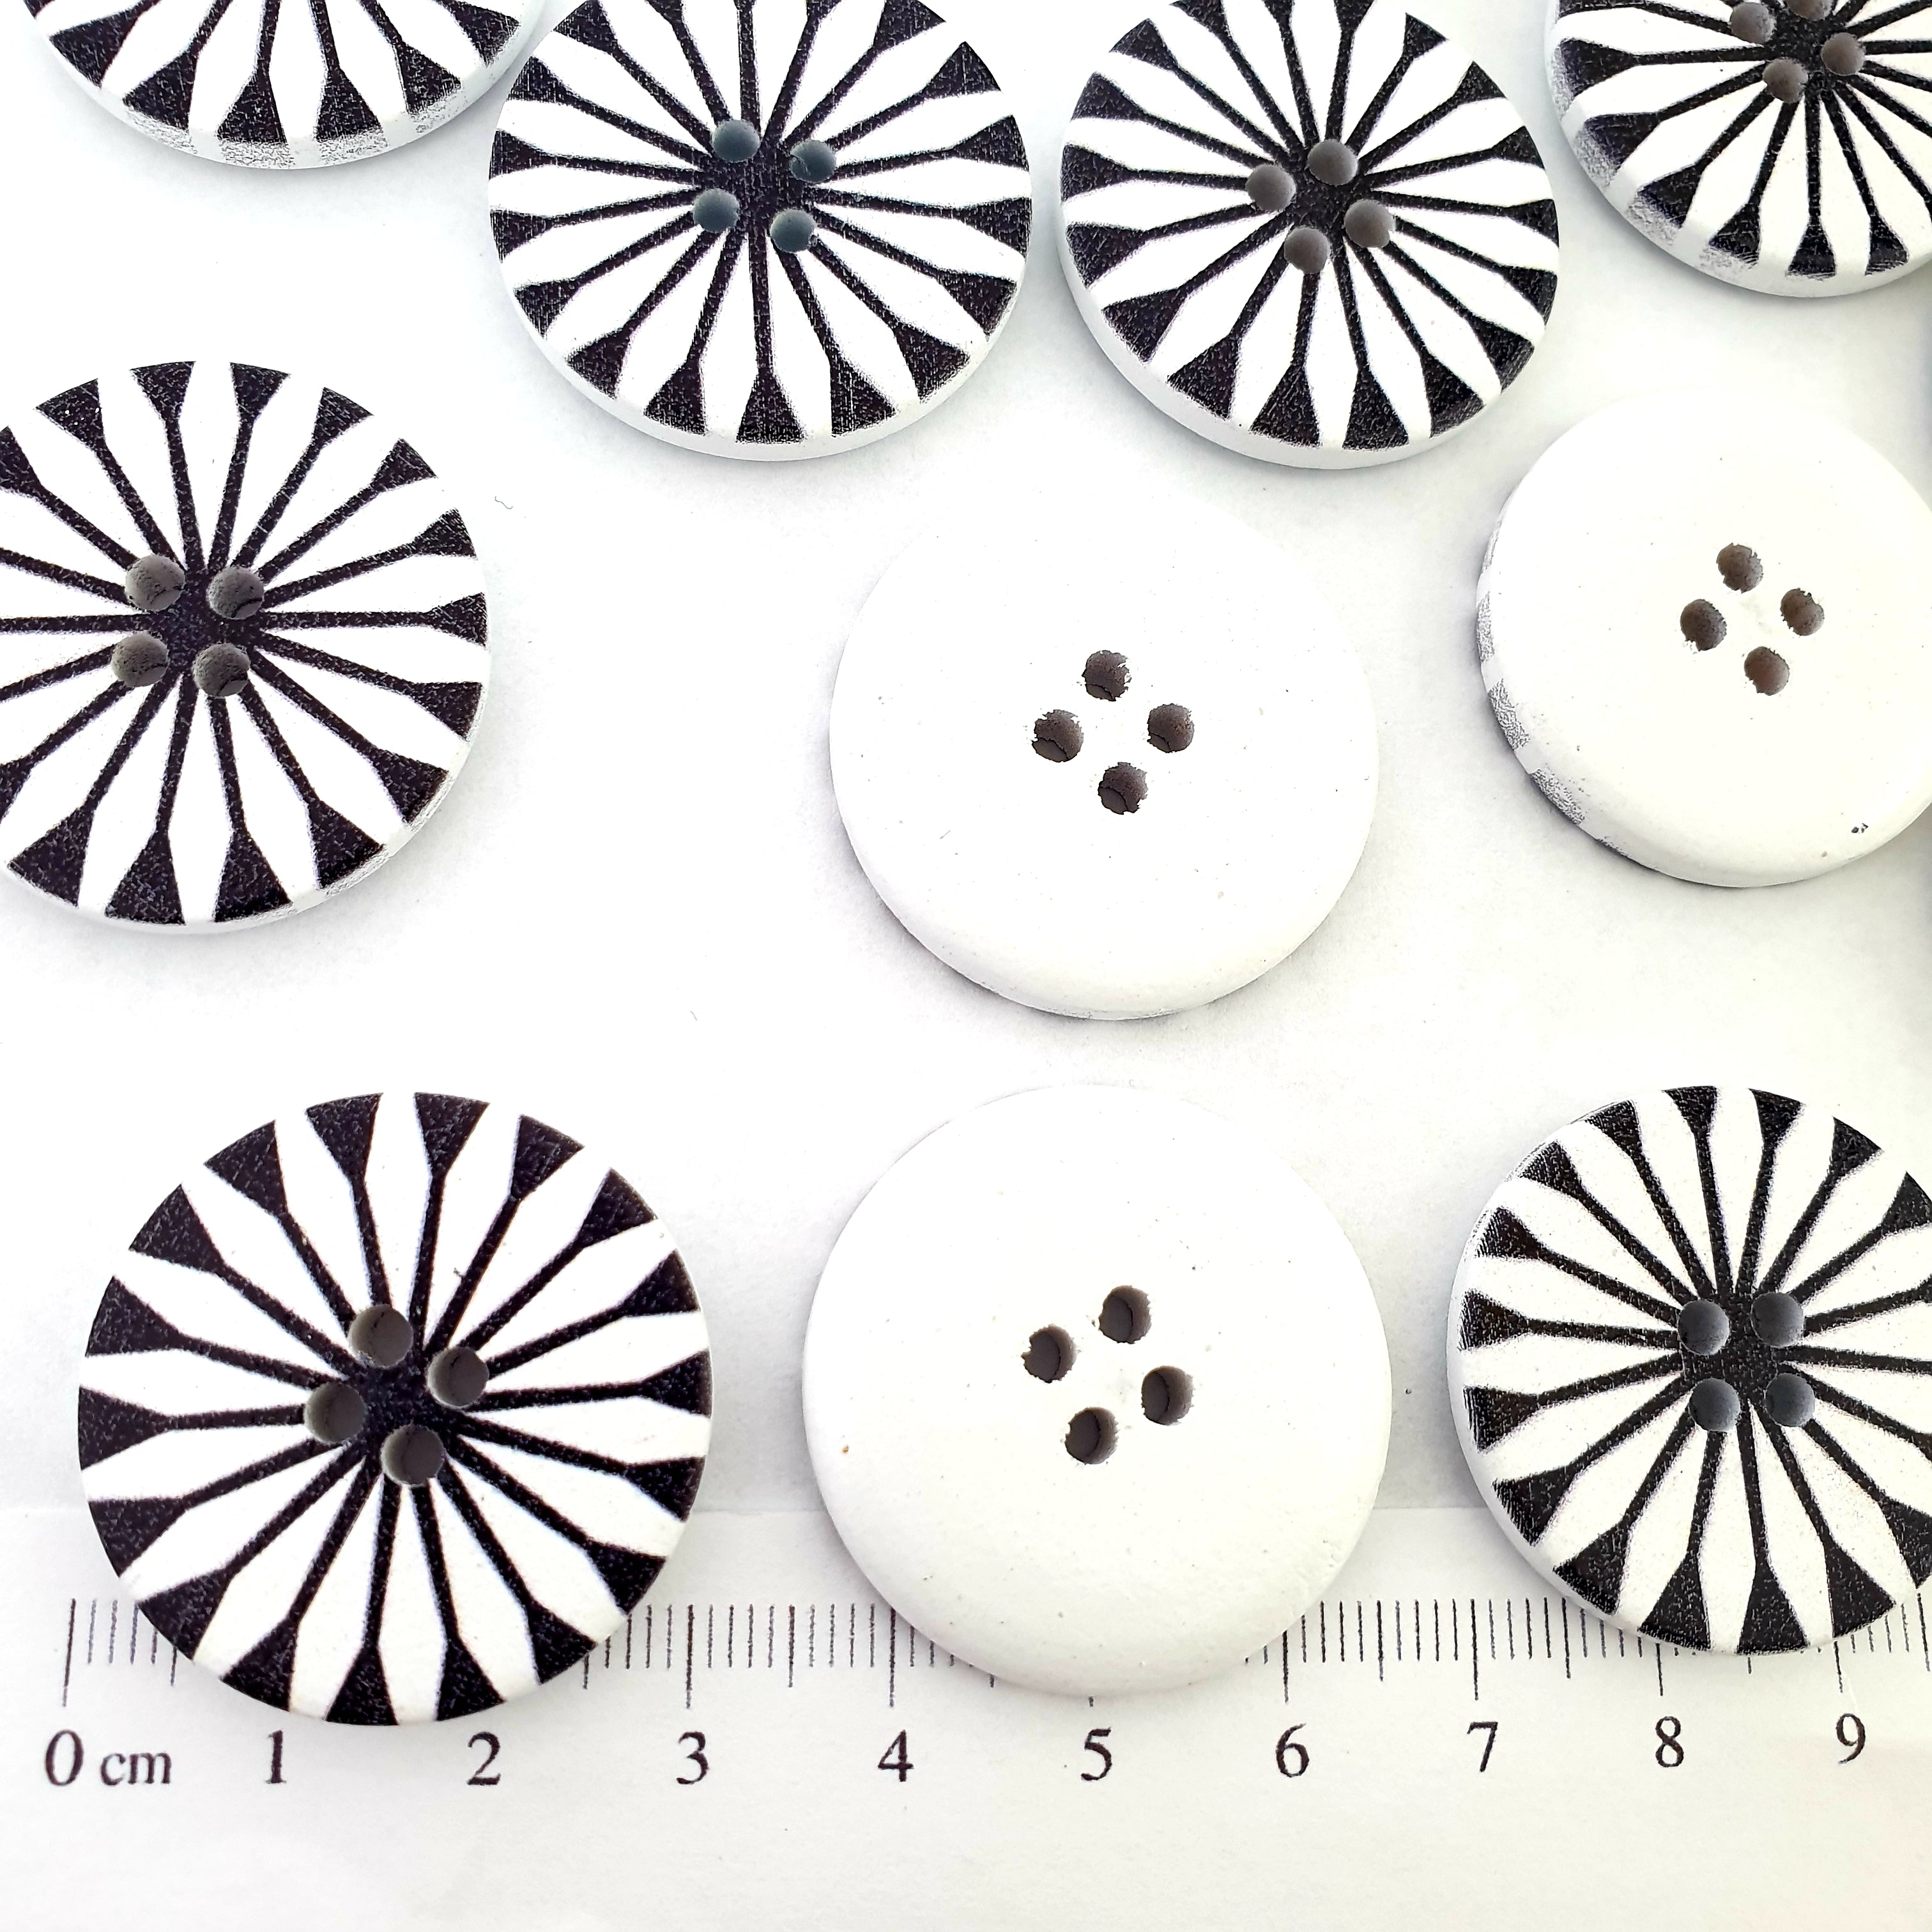 MajorCrafts 10pcs 30mm Black & White Flower 4 Holes Large Wooden Sewing Buttons